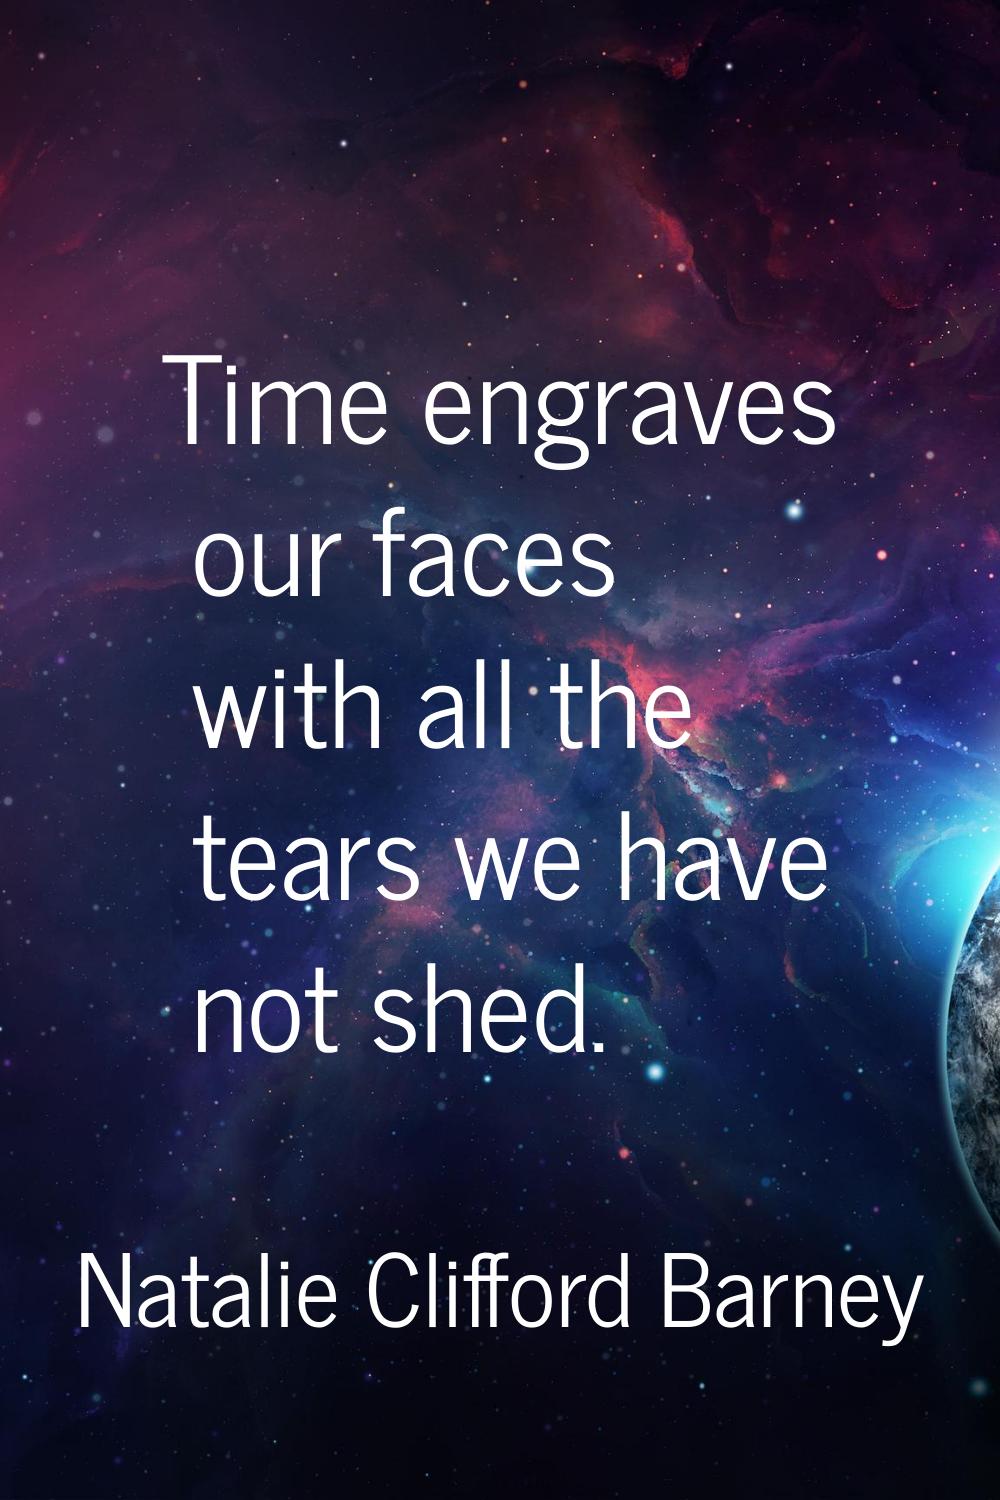 Time engraves our faces with all the tears we have not shed.